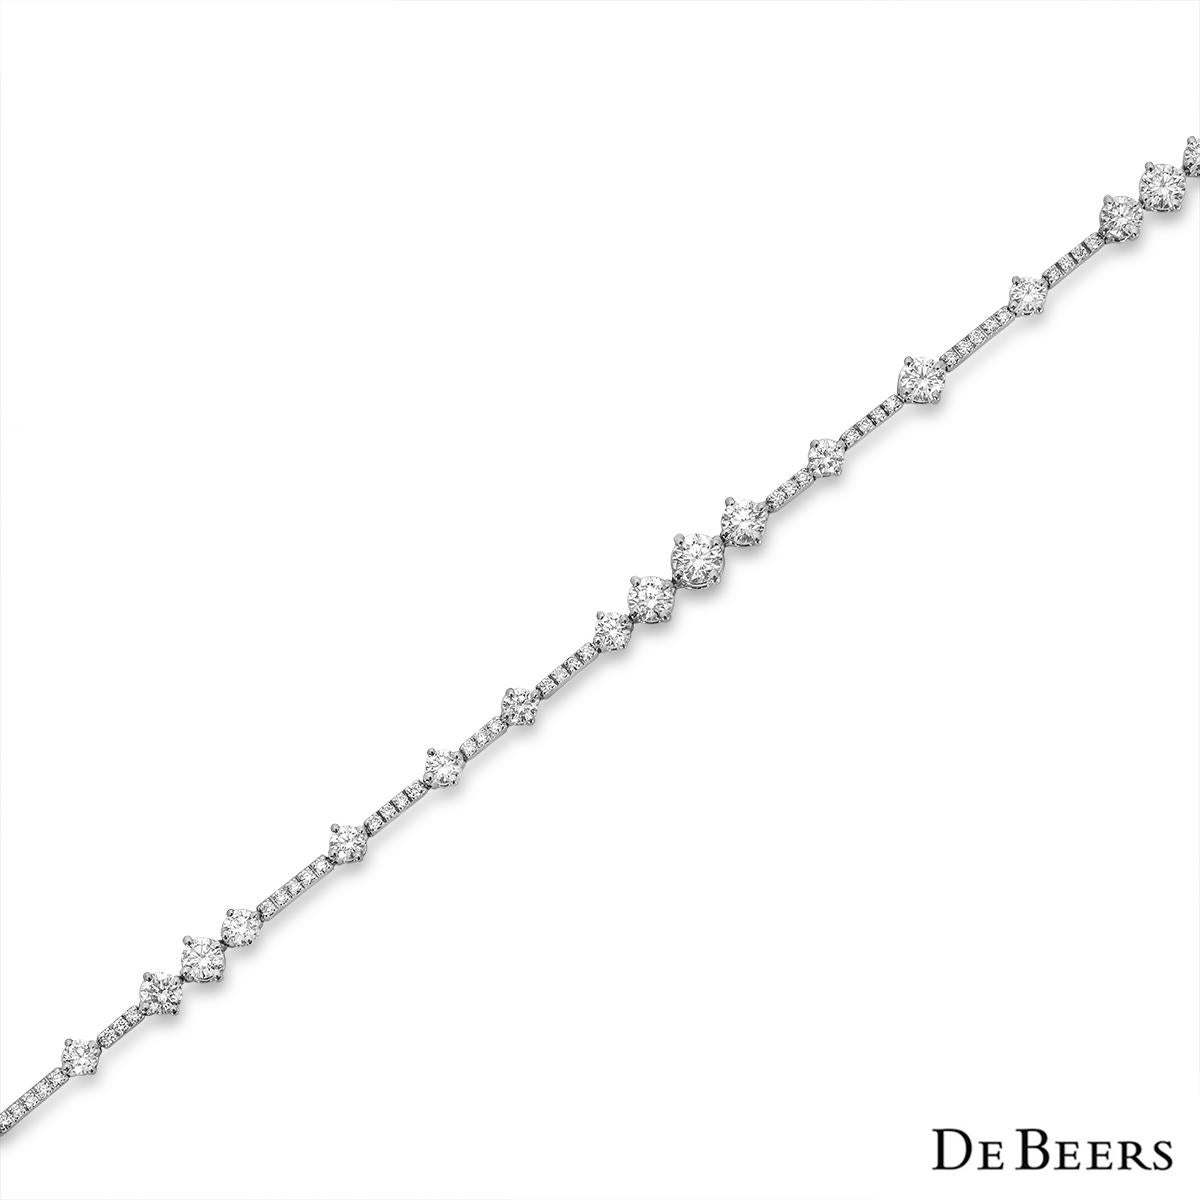 An exceptional 18k white gold diamond bracelet by De Beers from the Apreggia collection. The tennis bracelet is set with 91 round brilliant cut diamonds, varying in size, with a total carat weight of 2.62ct, G+ colour and VS+ clarity. The line